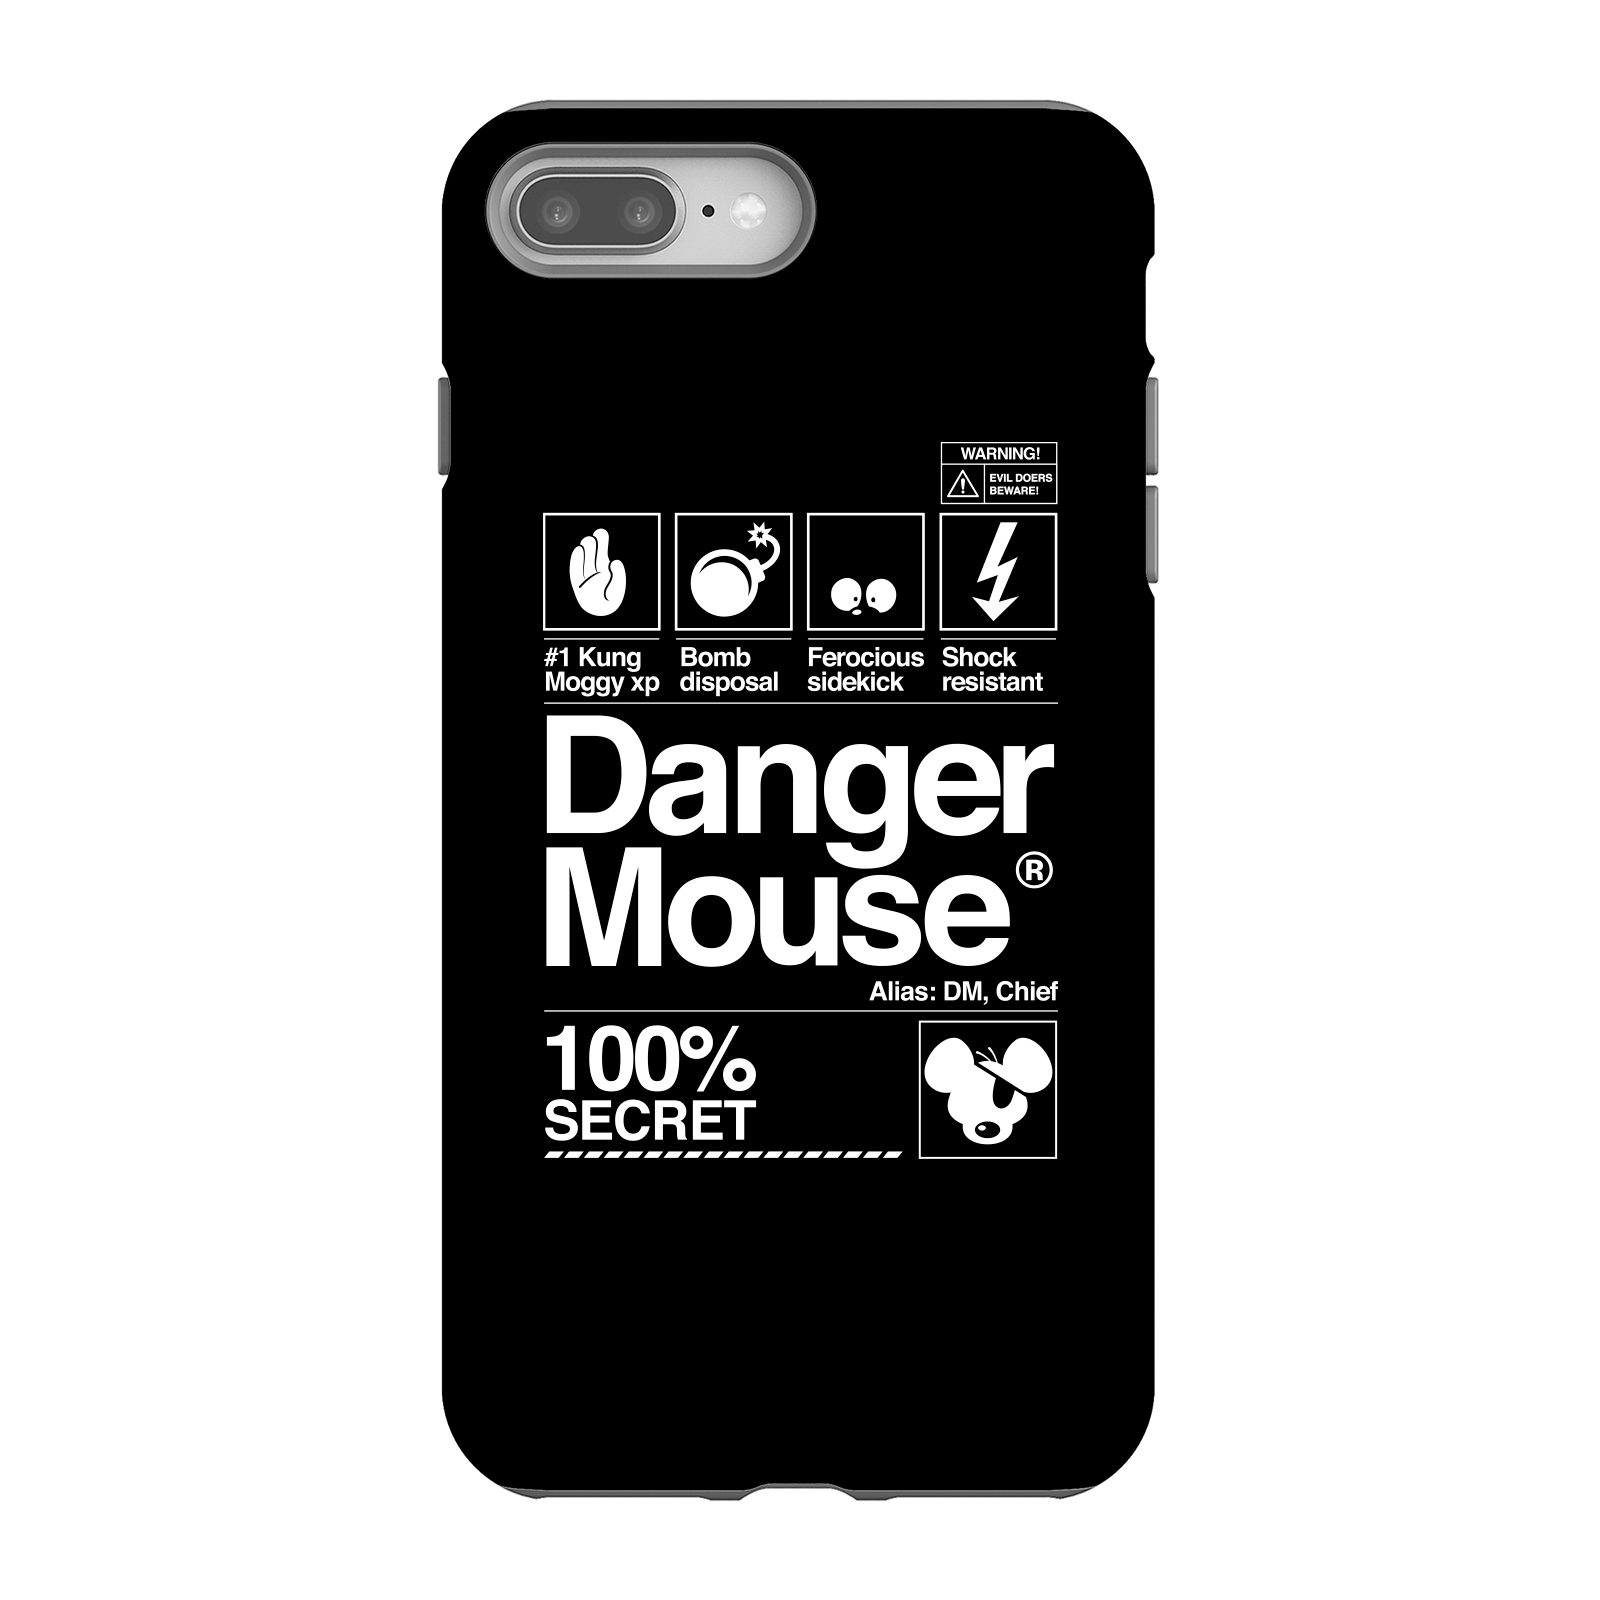 Danger Mouse 100% Secret Phone Case for iPhone and Android - iPhone 8 Plus - Tough Case - Gloss